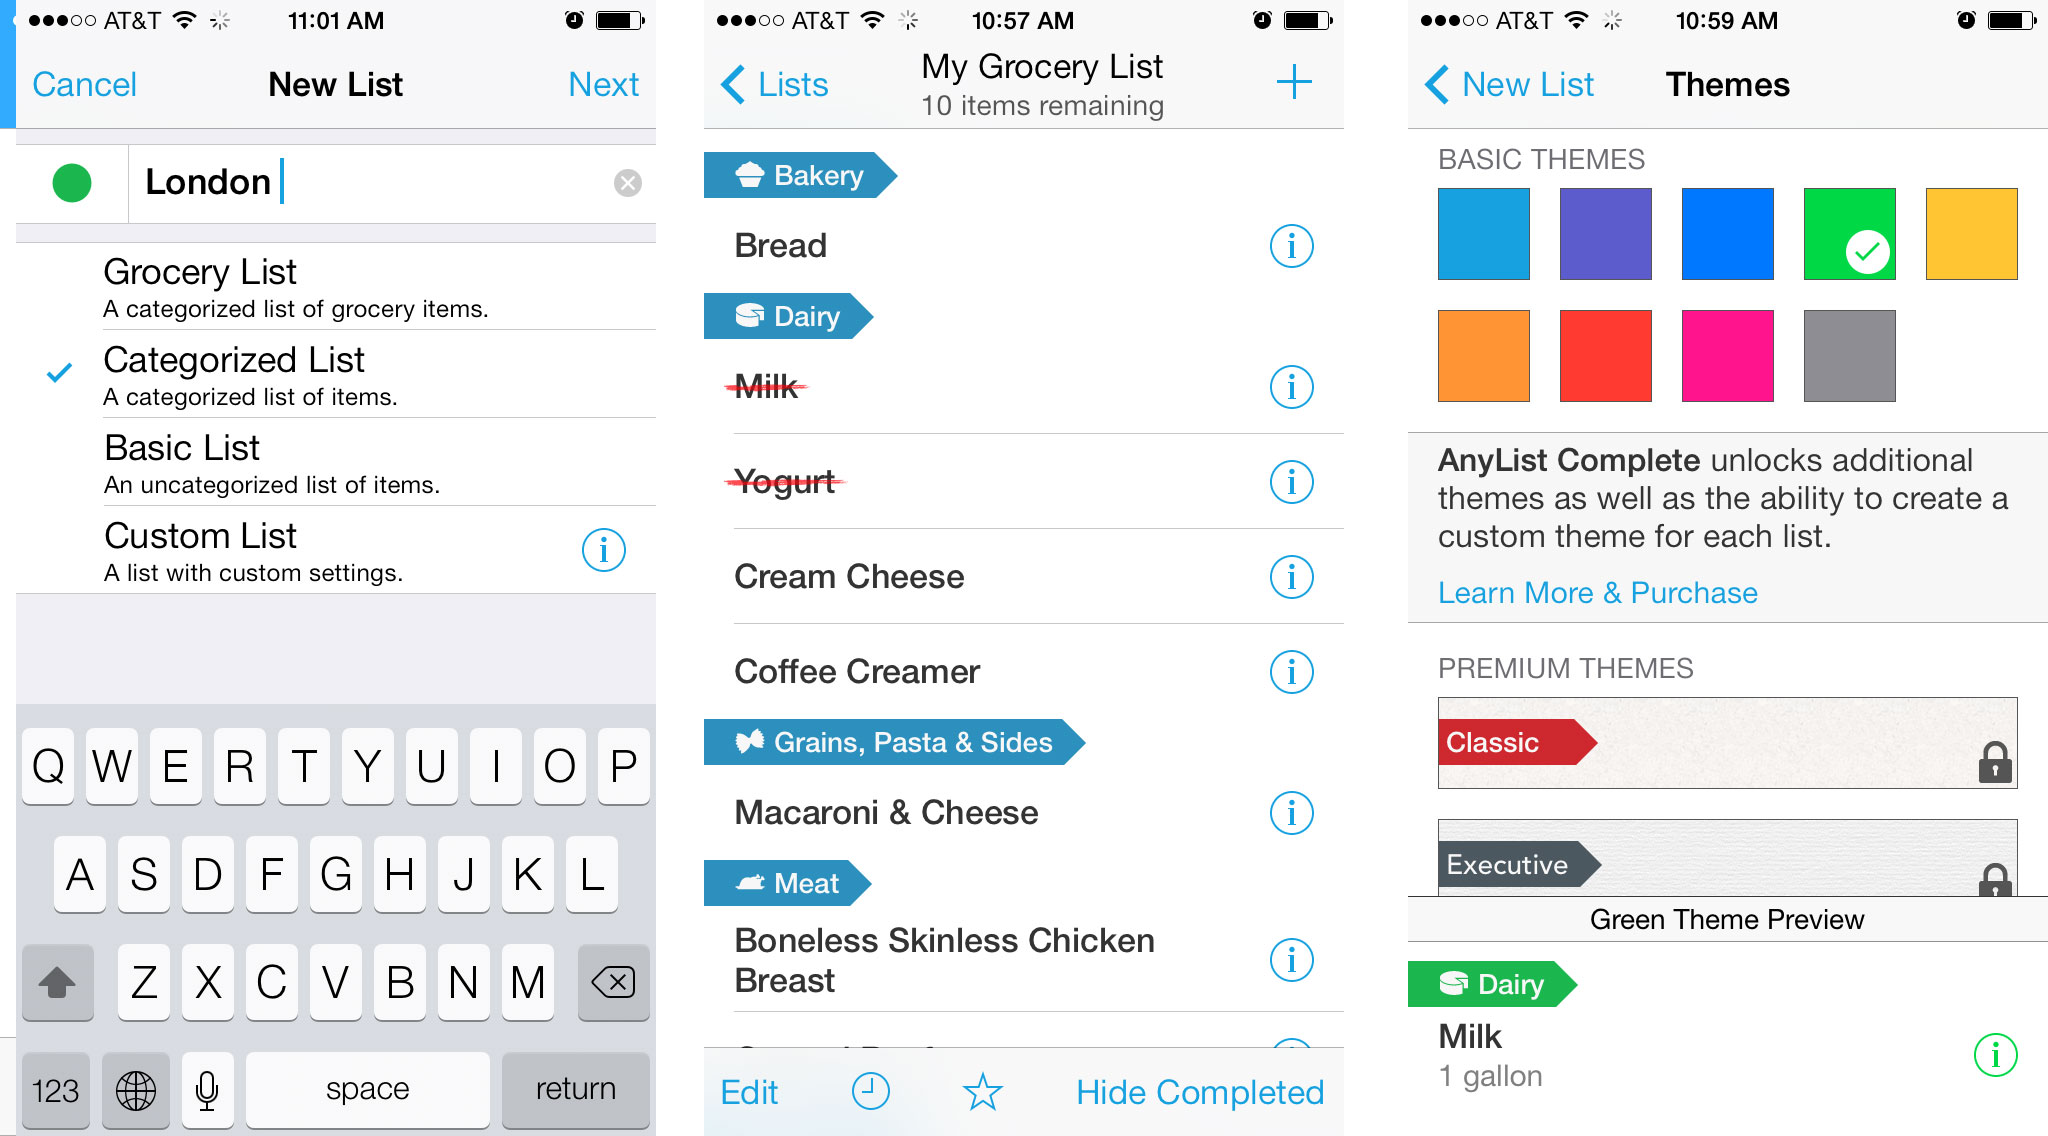 Best shopping and grocery list apps for iPhone: AnyList